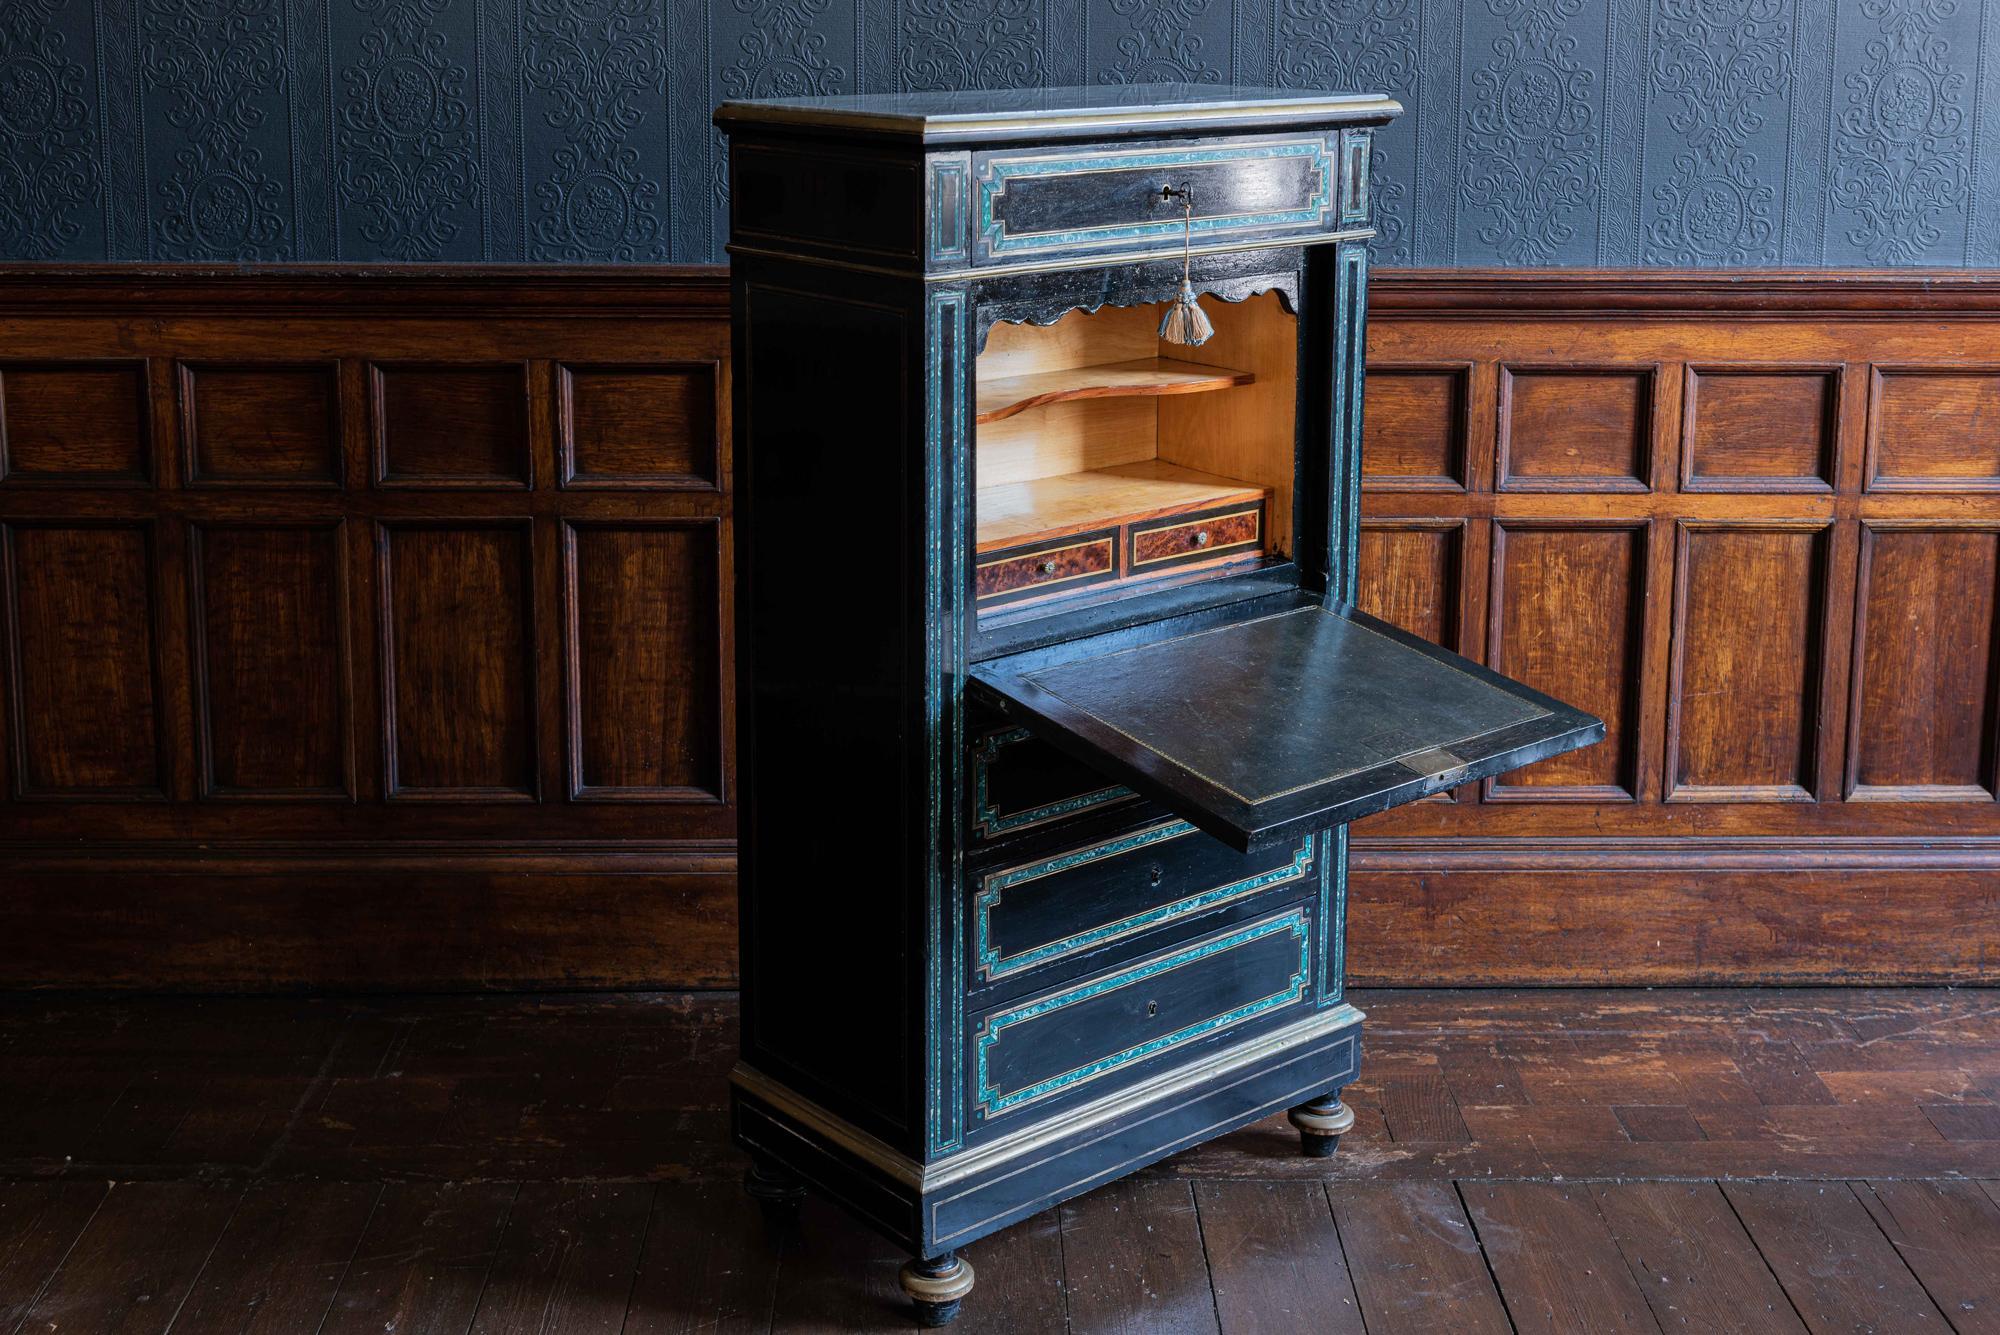 French Napoleon III ebonized secrétaire with inlaid brass, circa 1860
Brass trim supports the grey marble top and features throughout as a delicate inlay,
Sourced from Paris, comes with two working keys.

73w 38d 134h cm